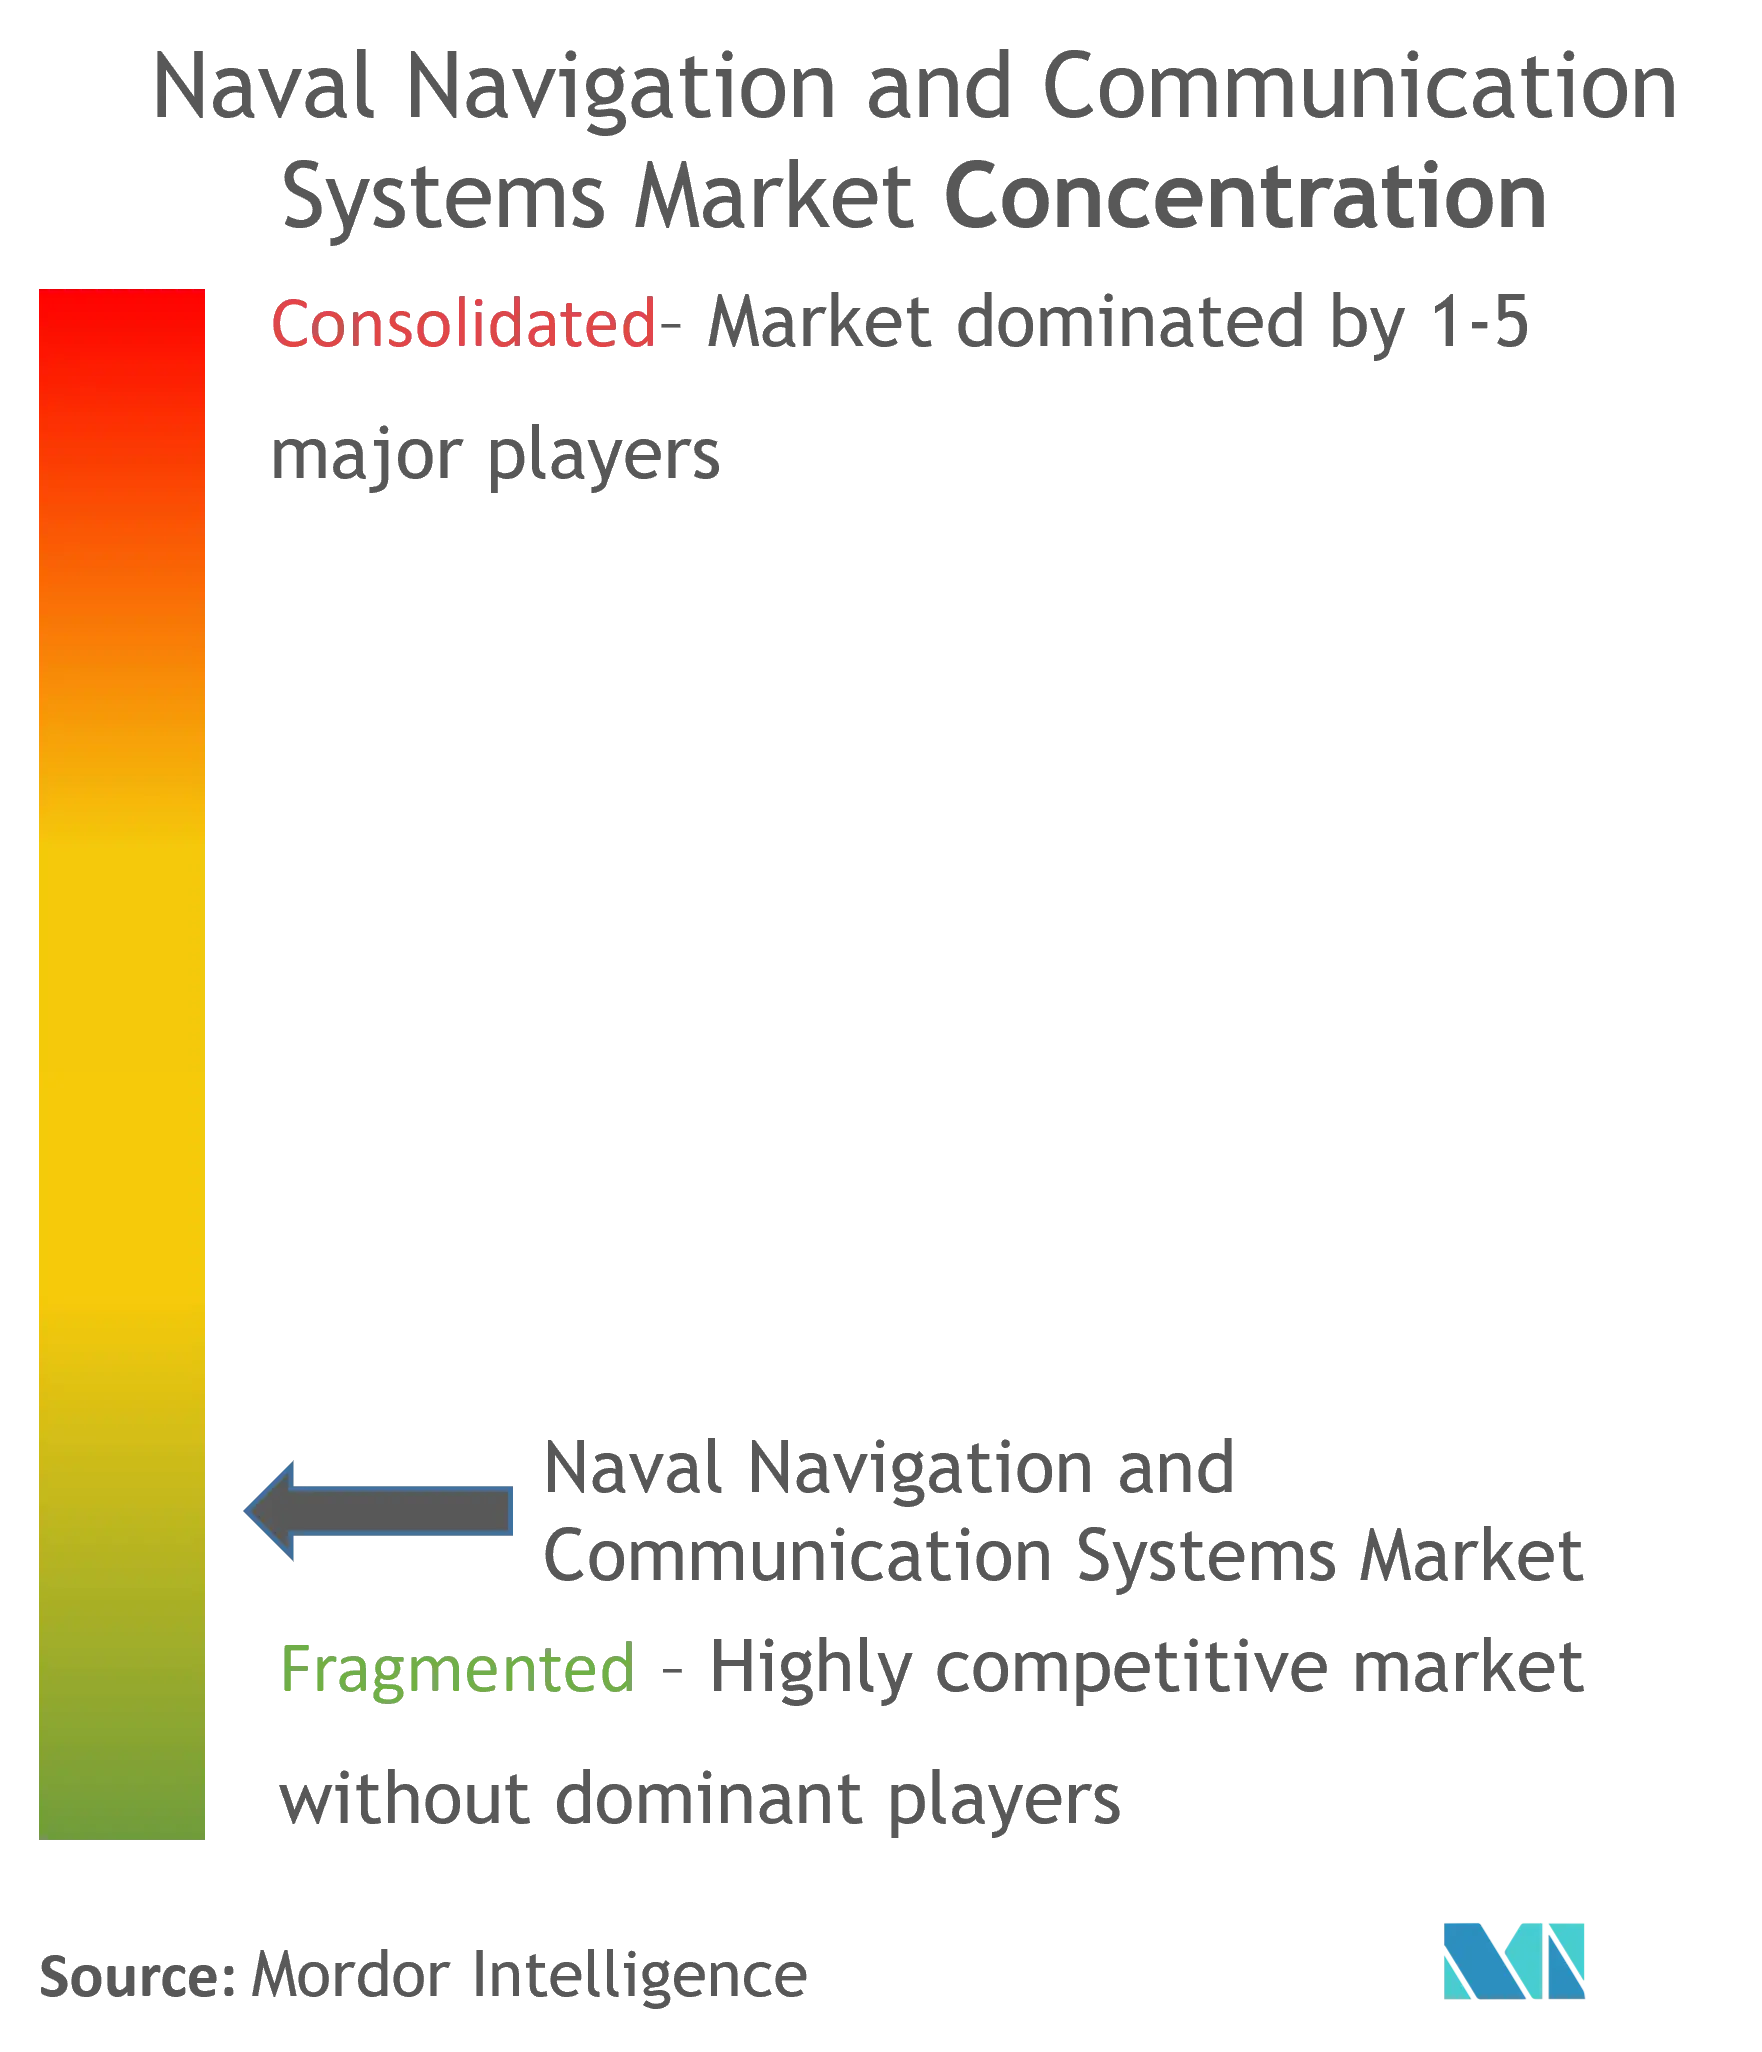 Naval Navigation And Communication Systems Market Concentration